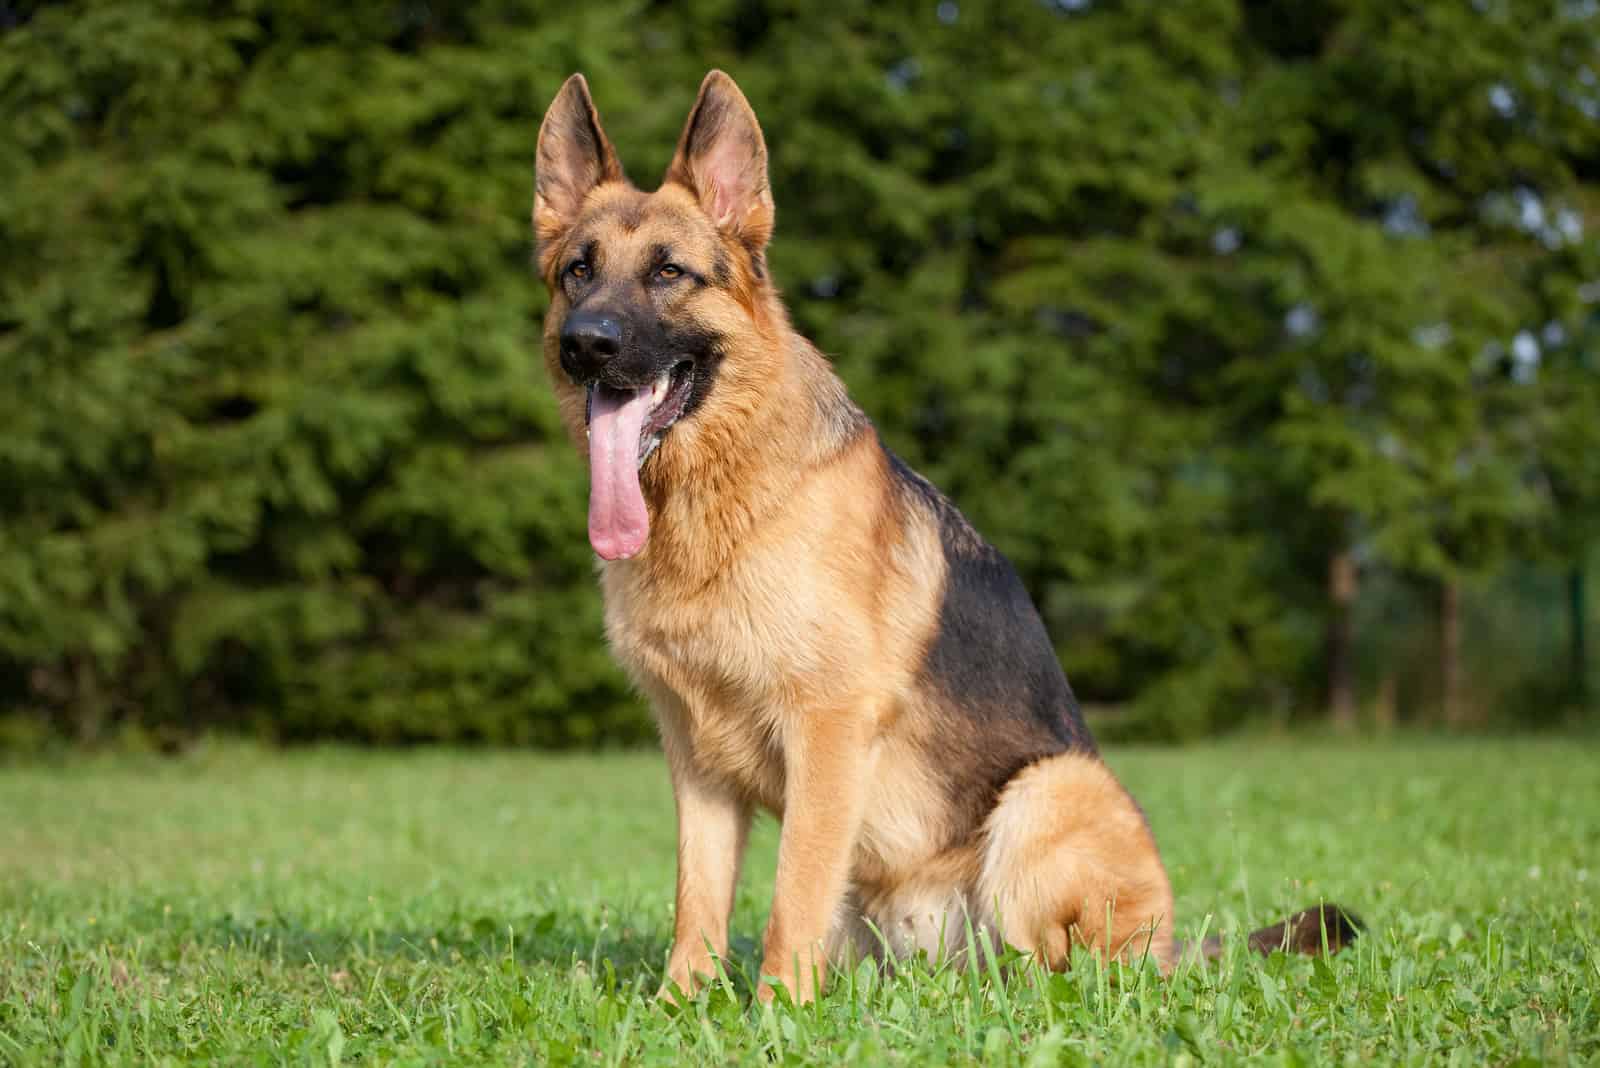 A German shepherd is sitting on the grass